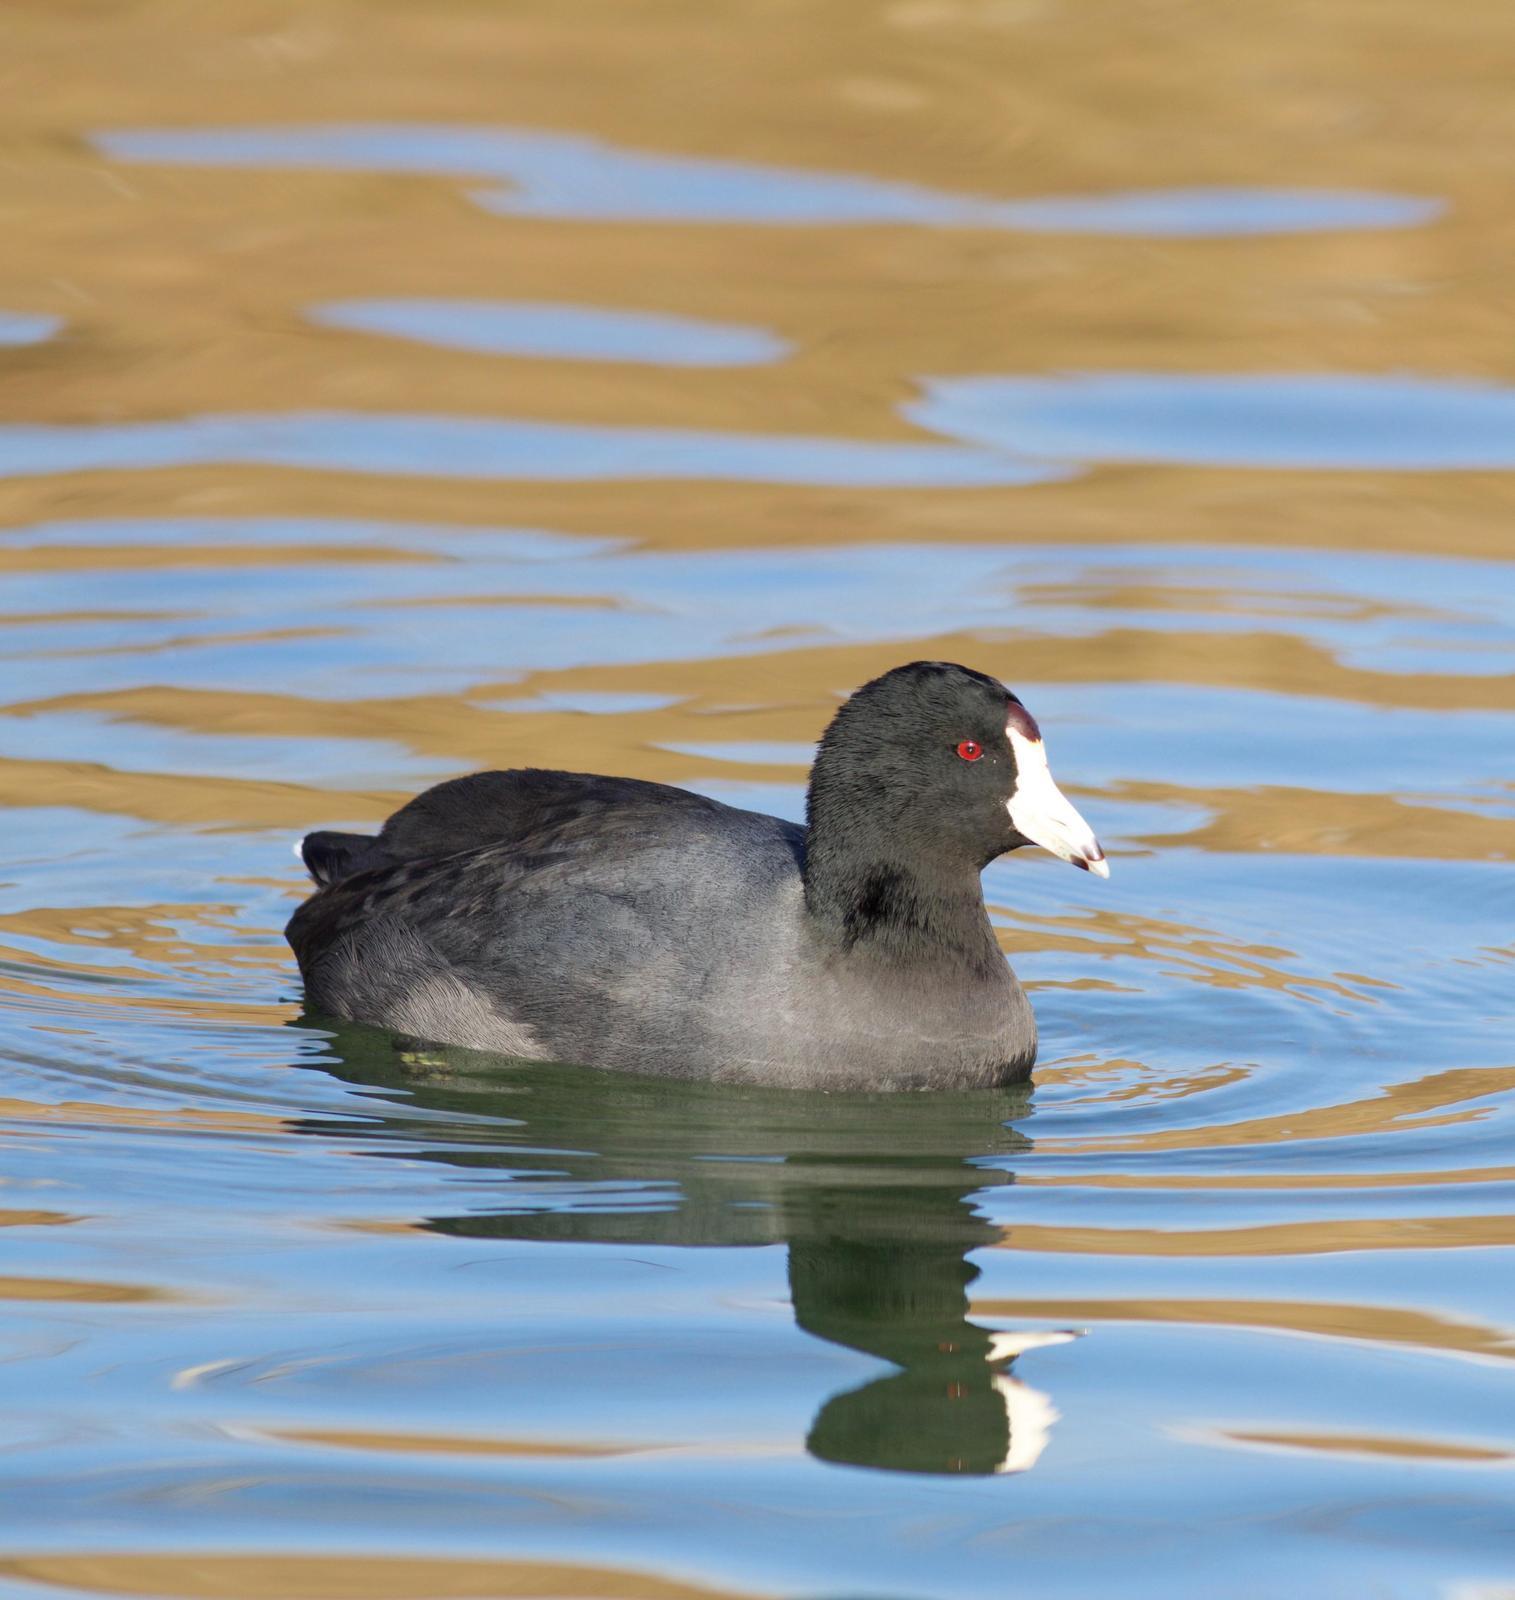 American Coot Photo by Kathryn Keith